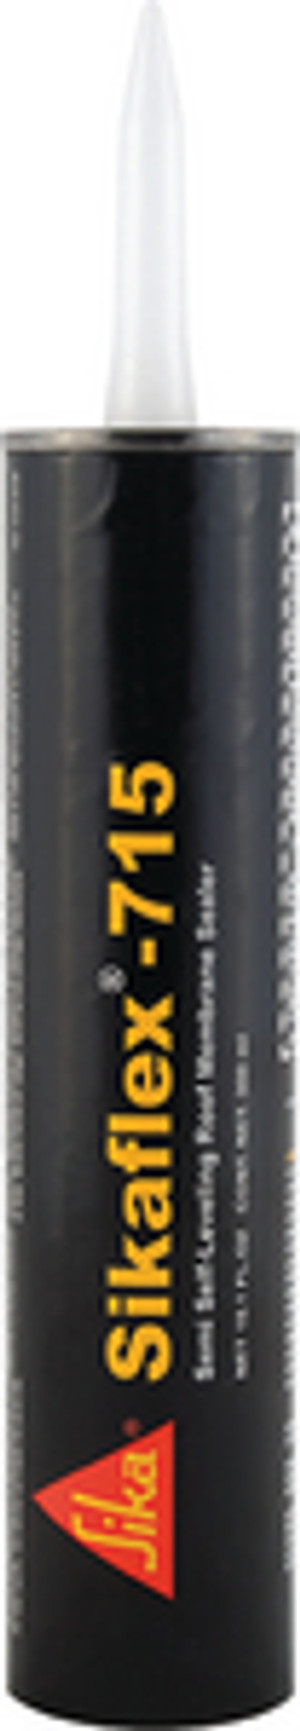 A P PRODUCTS 017-187690 SIKAFLEX 715 ROOF SEALANT